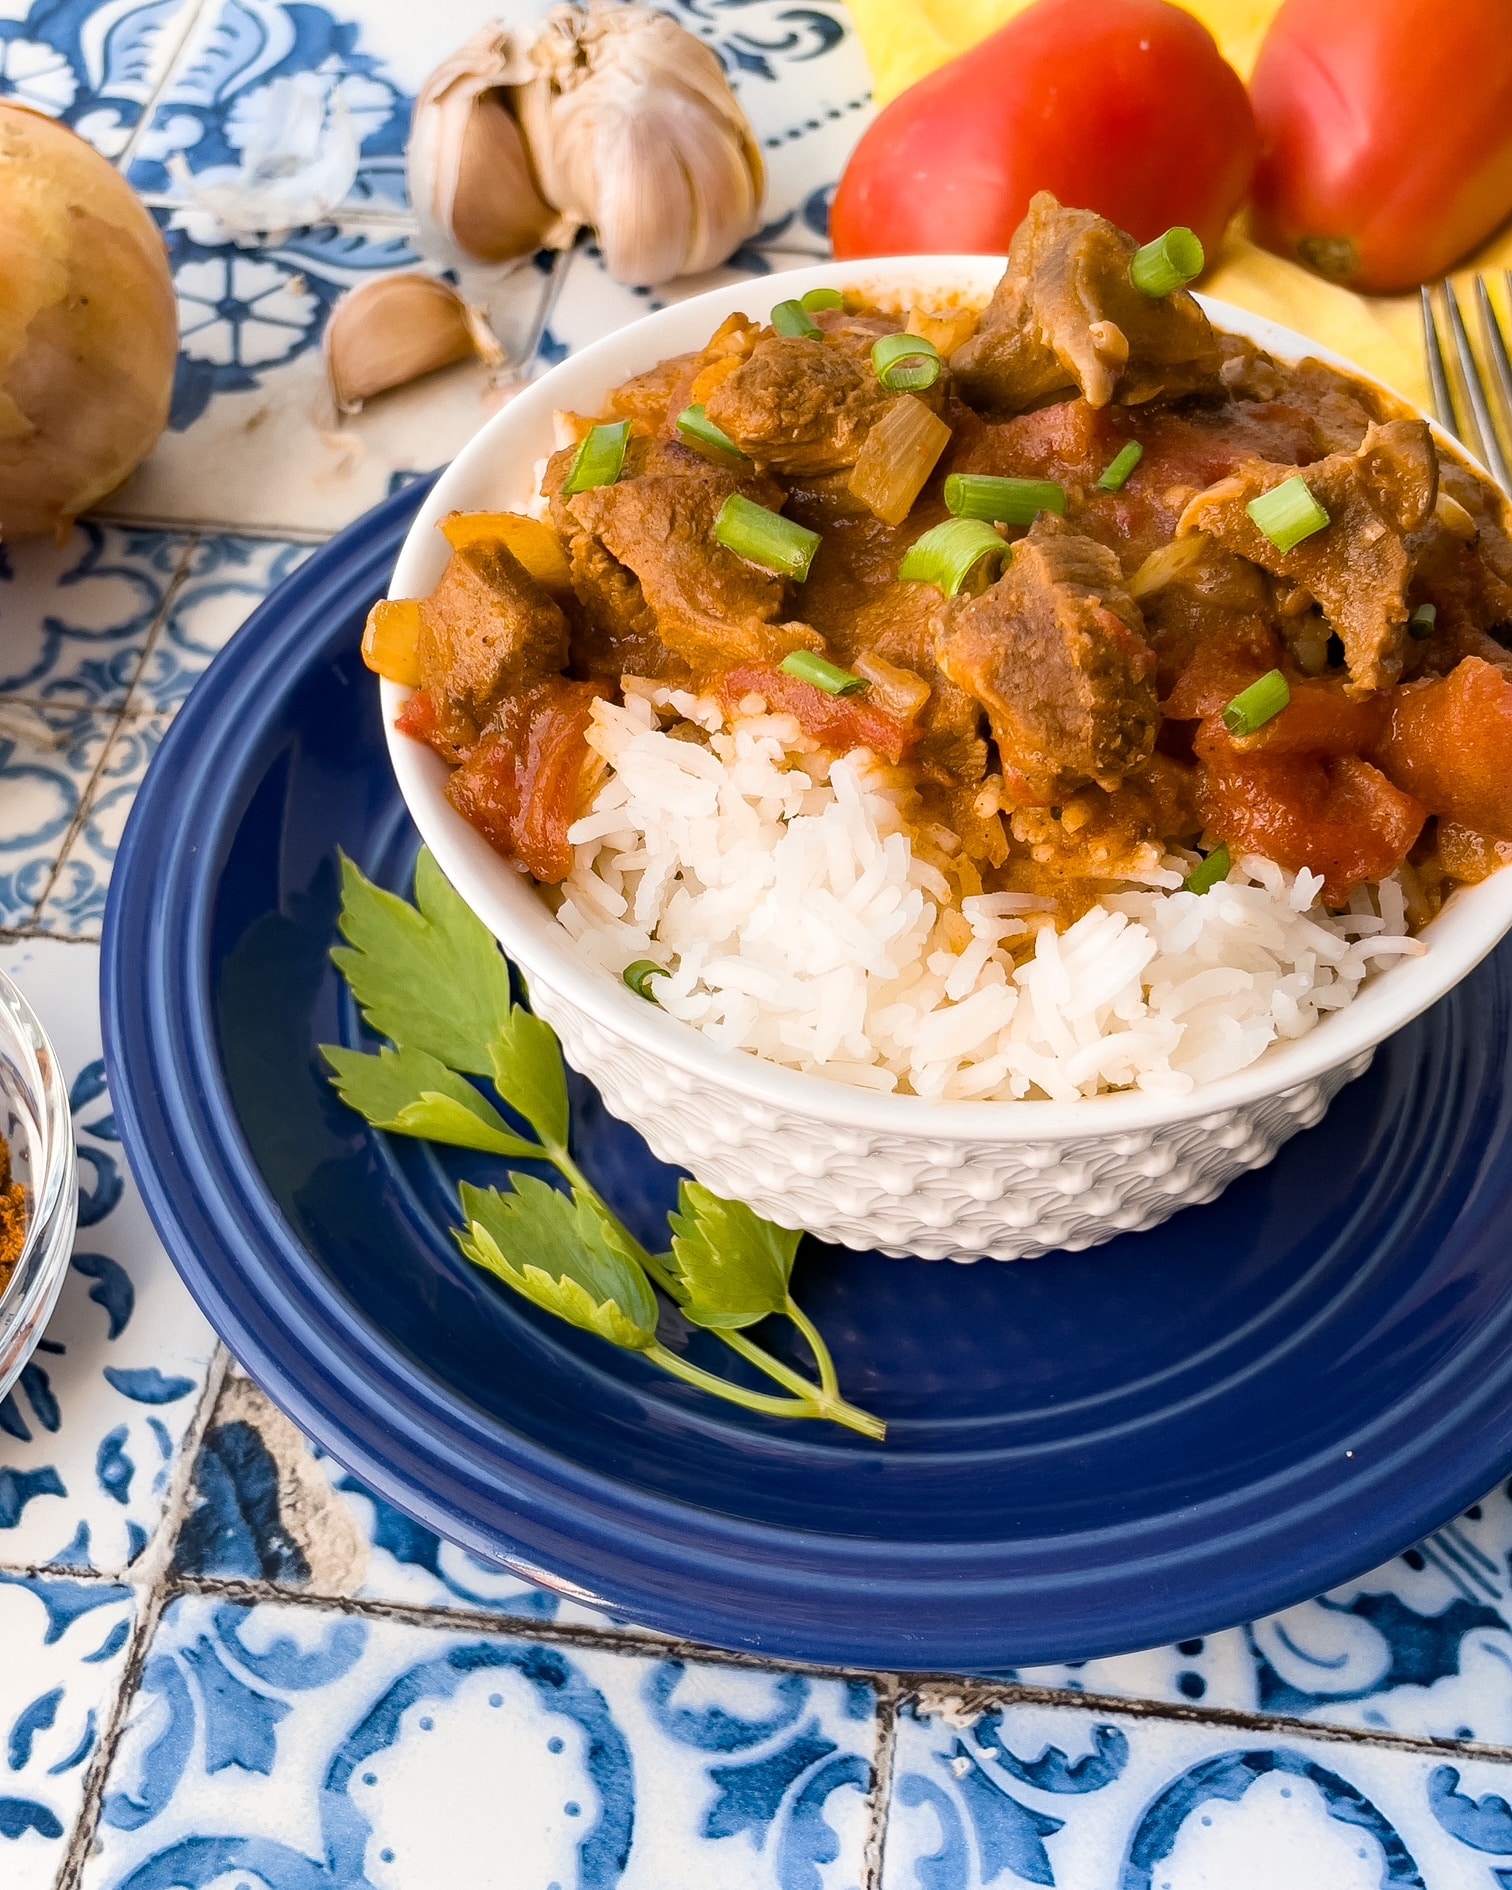 A bowl of lamb curry and rice in front of some tomatoes and a bulb of garlic.